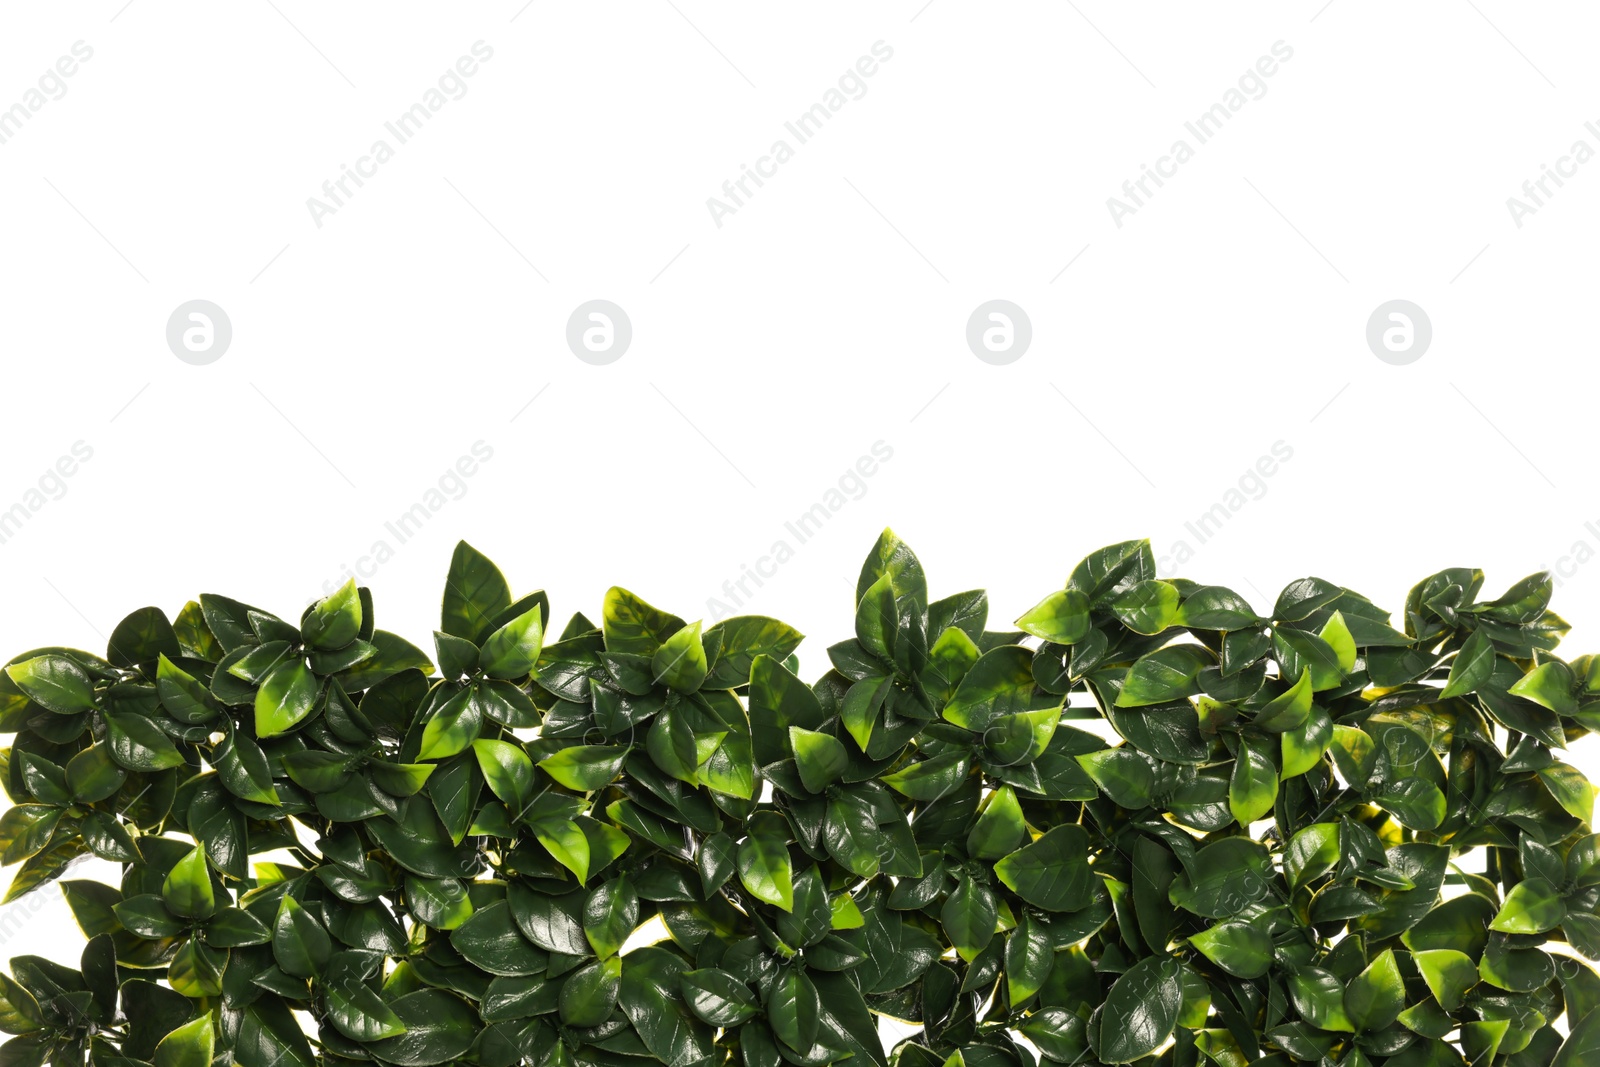 Photo of Green artificial plants with lush leaves isolated on white